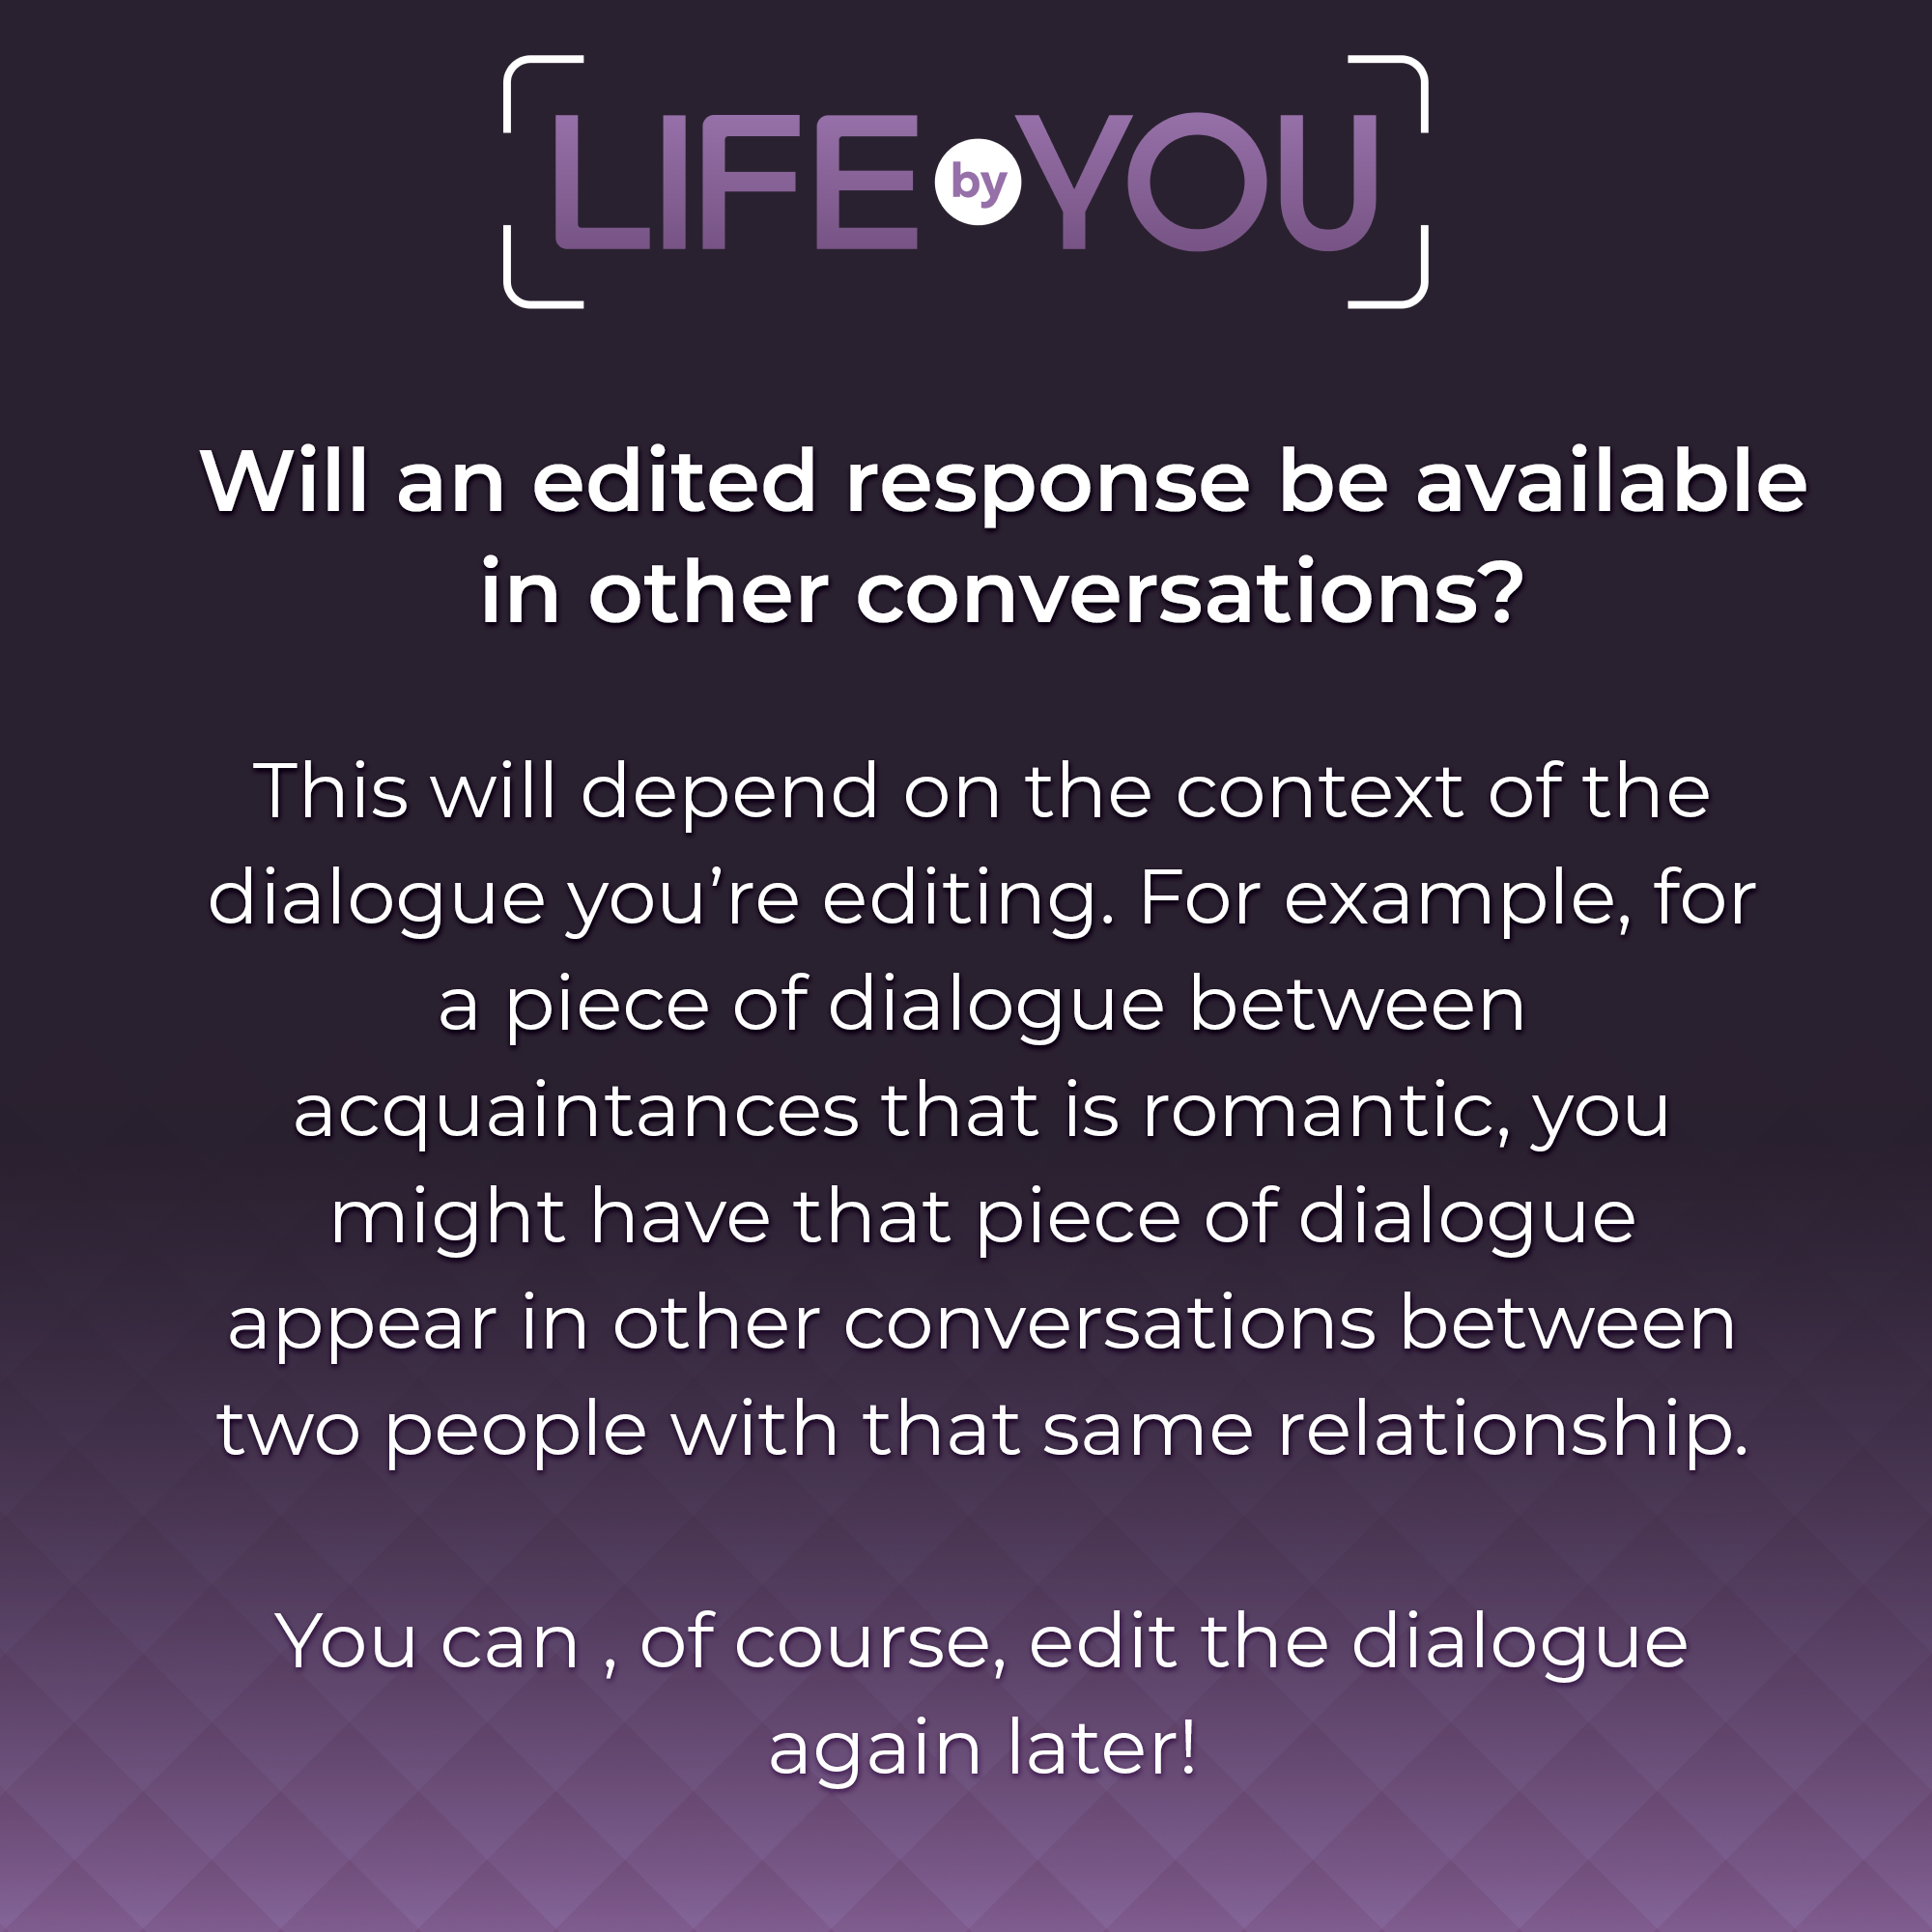 QnA Will edited responses be available in other conversations?